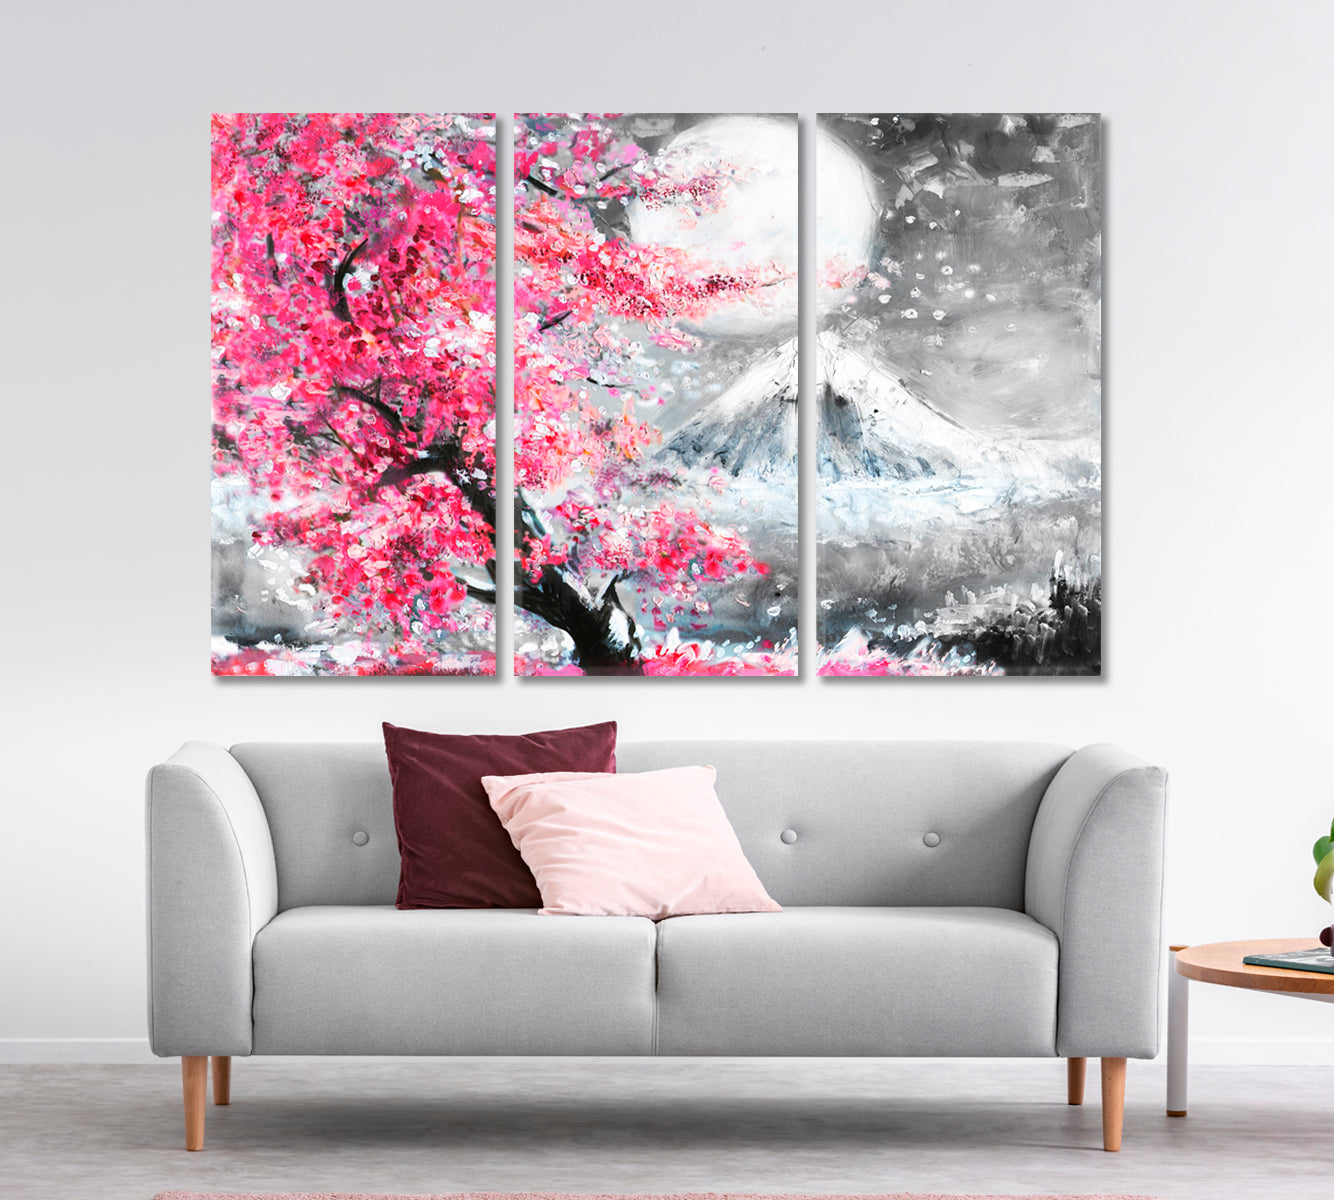 Landscape With Sakura And Mountain Asian Style Canvas Print Wall Art Artesty 3 panels 36" x 24" 